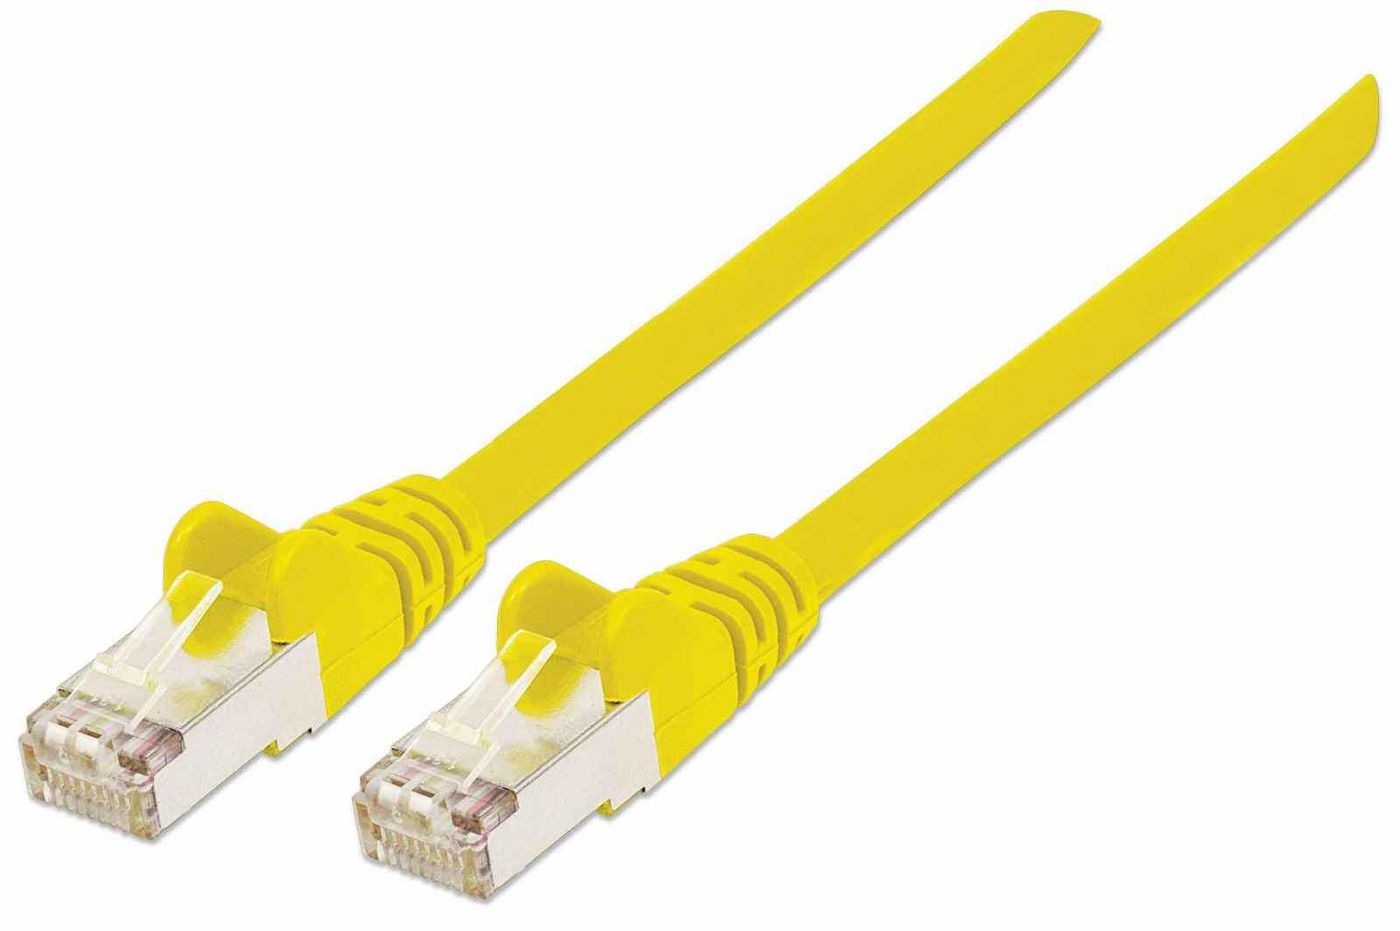 Intellinet 740586 High Performance Network Cable 